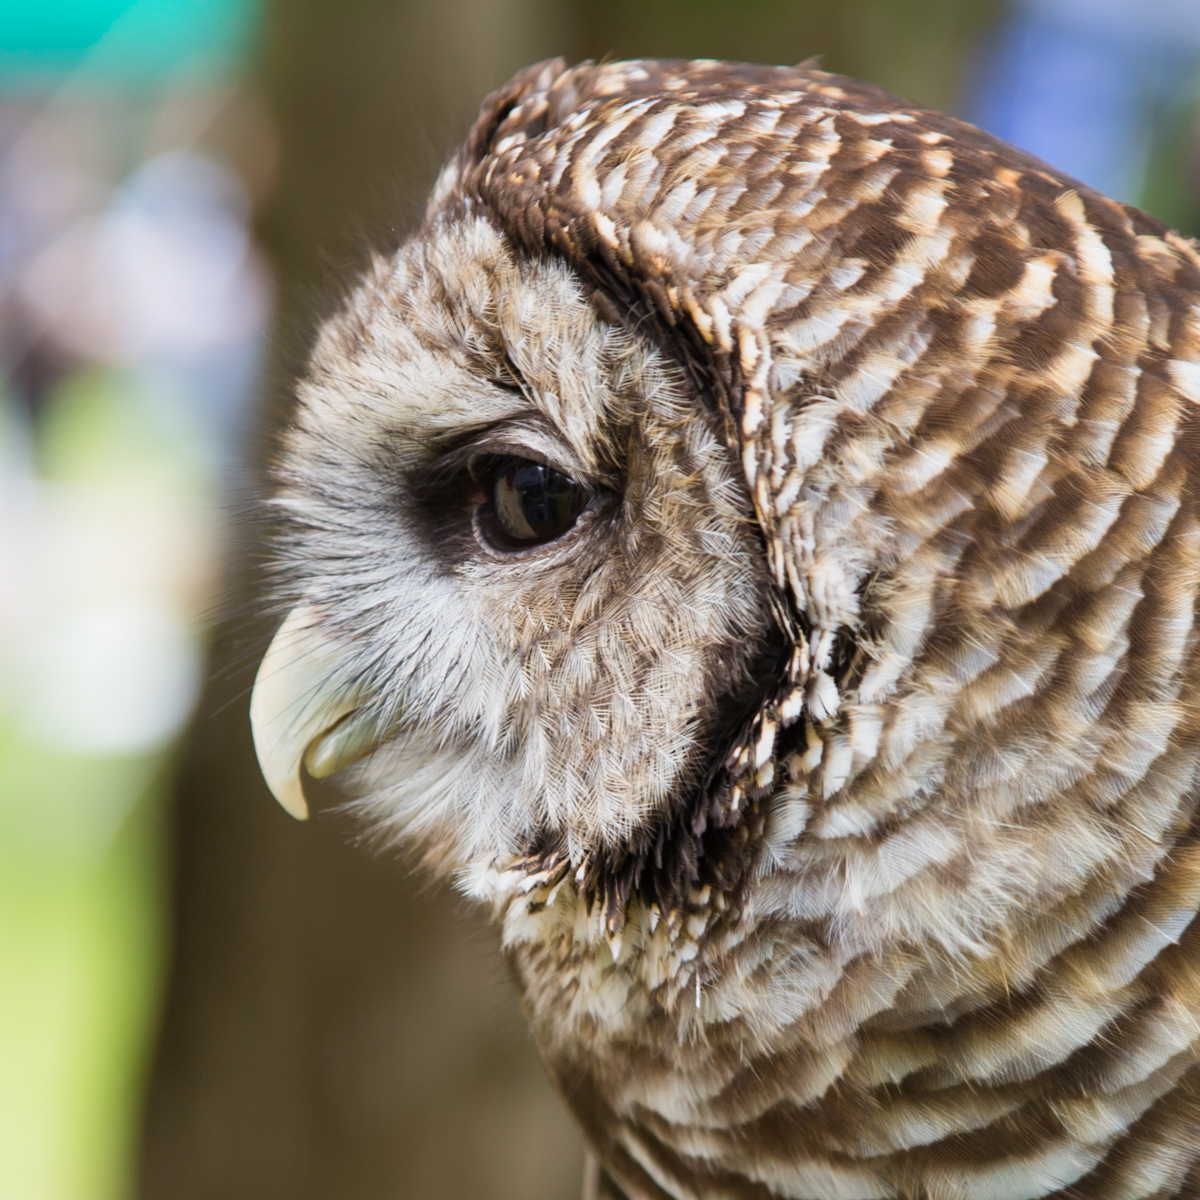 Gus the Barred Owl